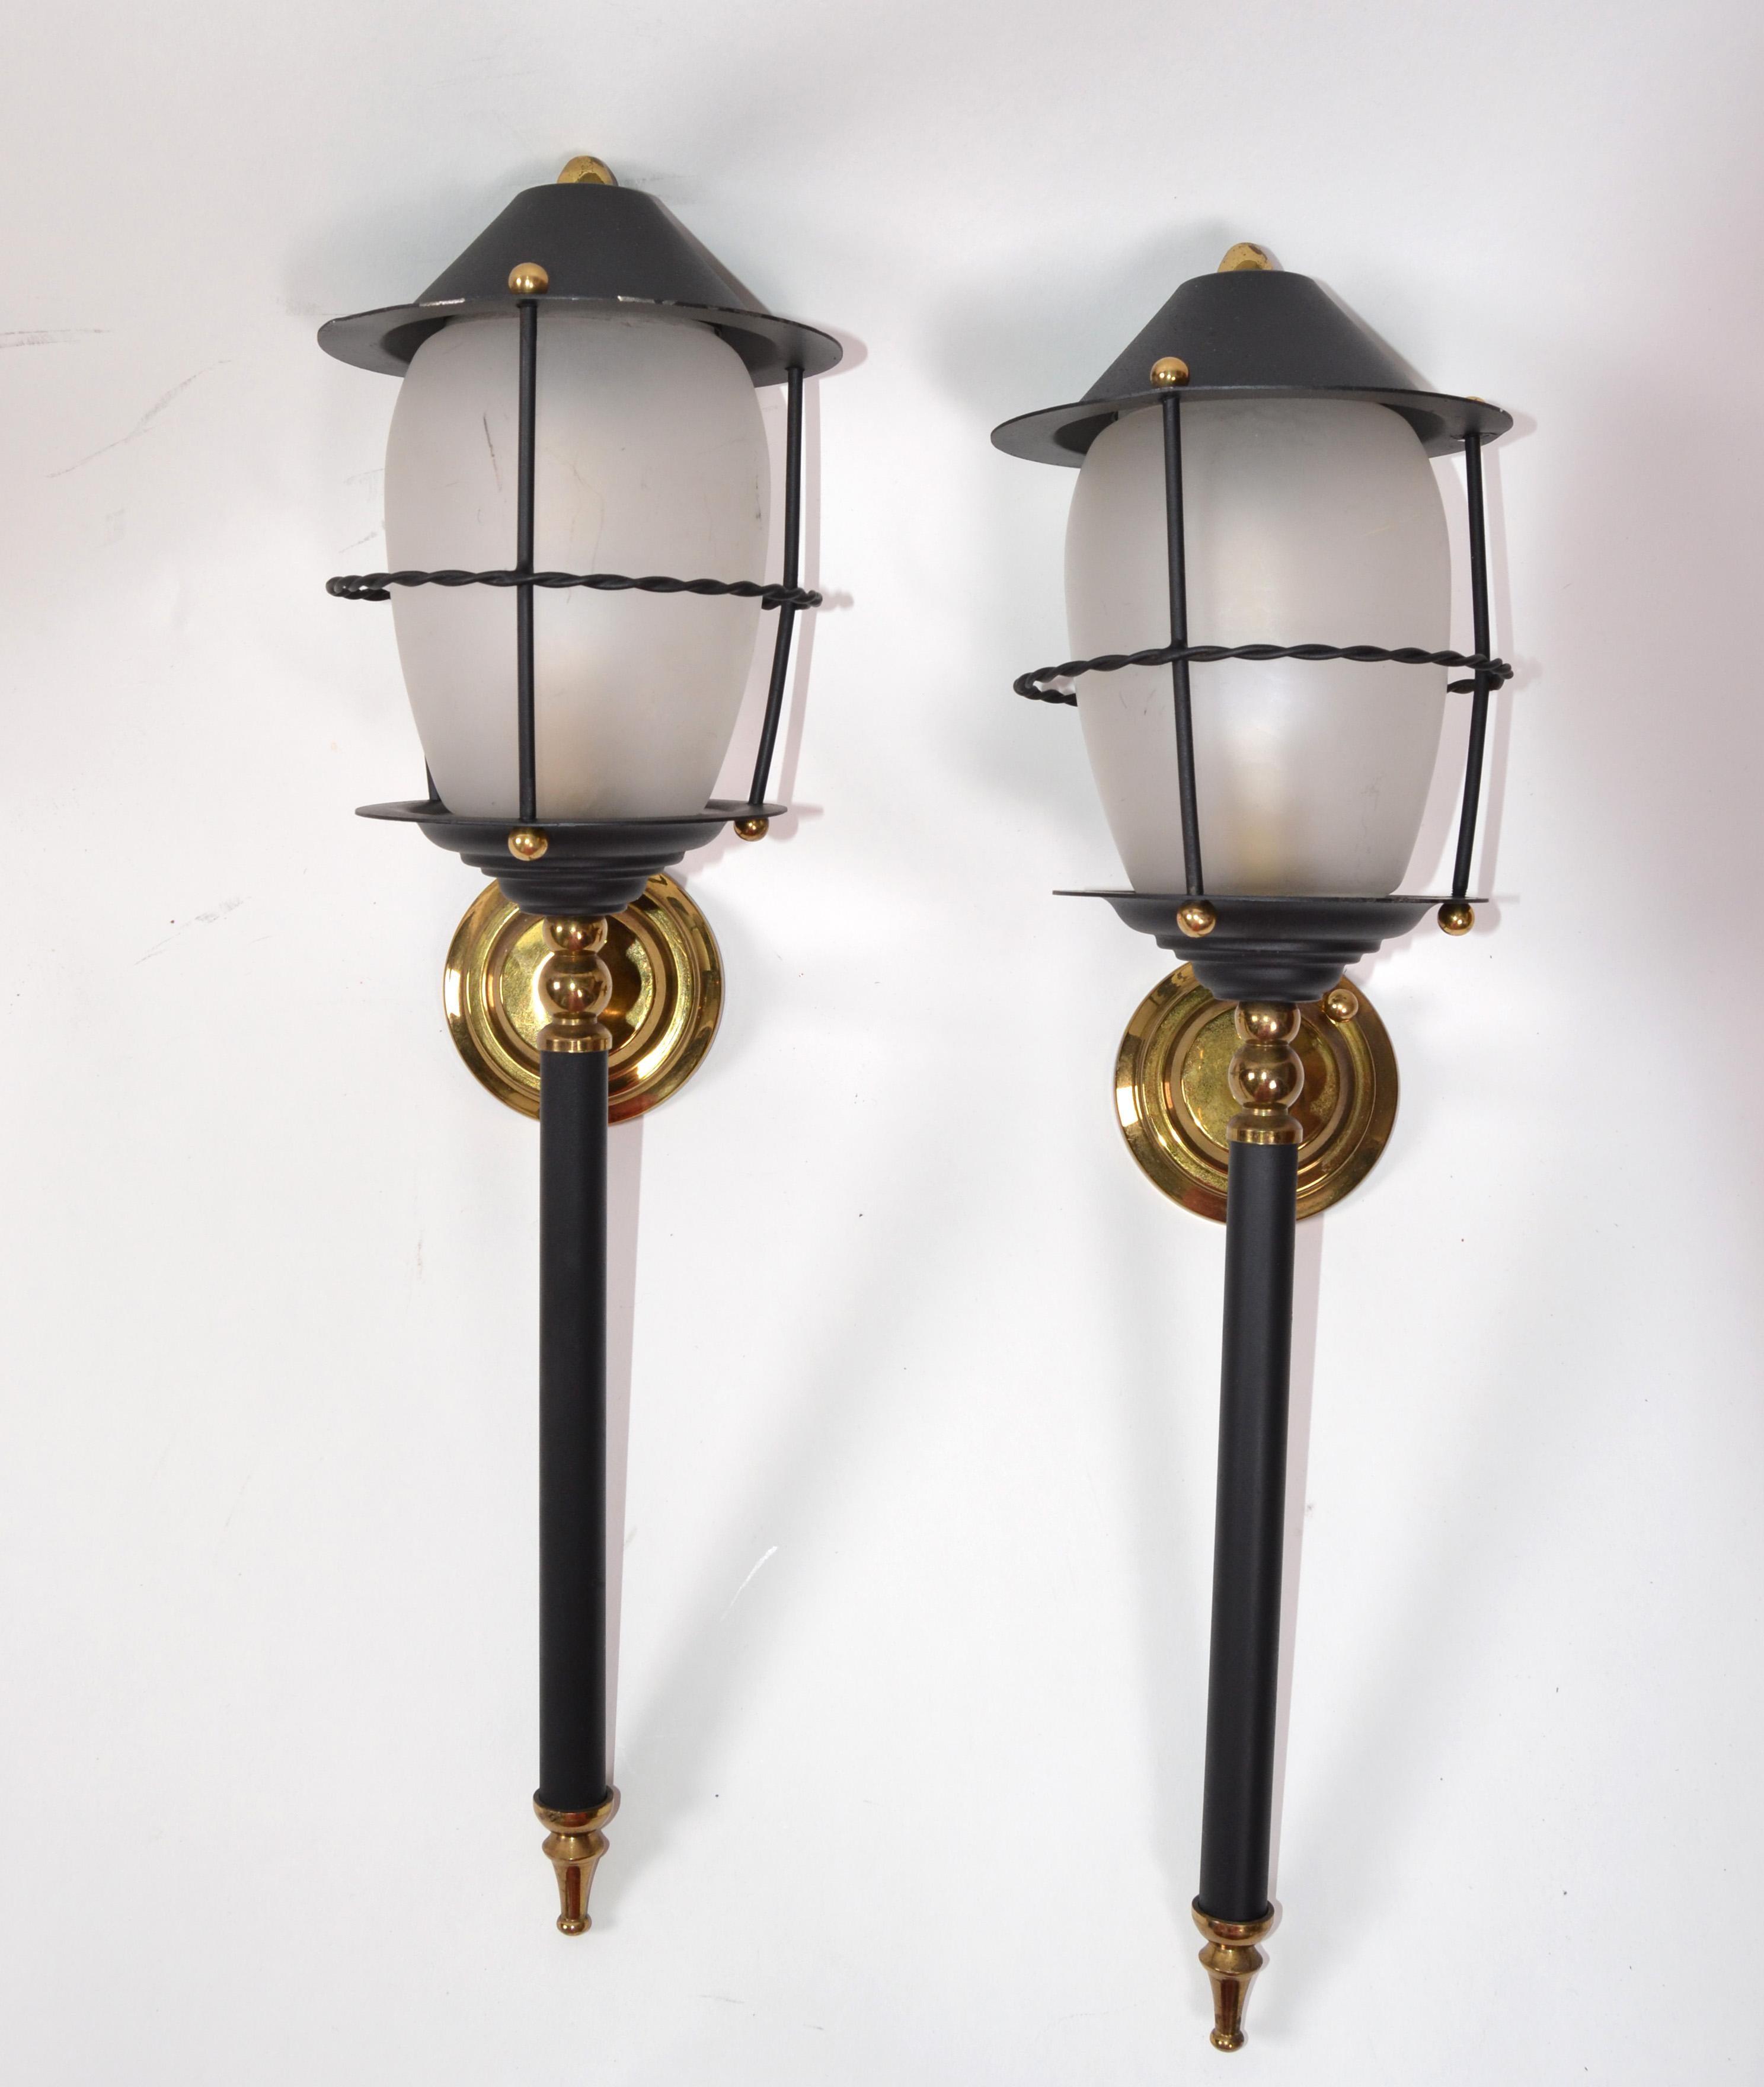 Maison Lunel Pair of Black Glass and Brass Lantern Wall Mounted Sconces France 2